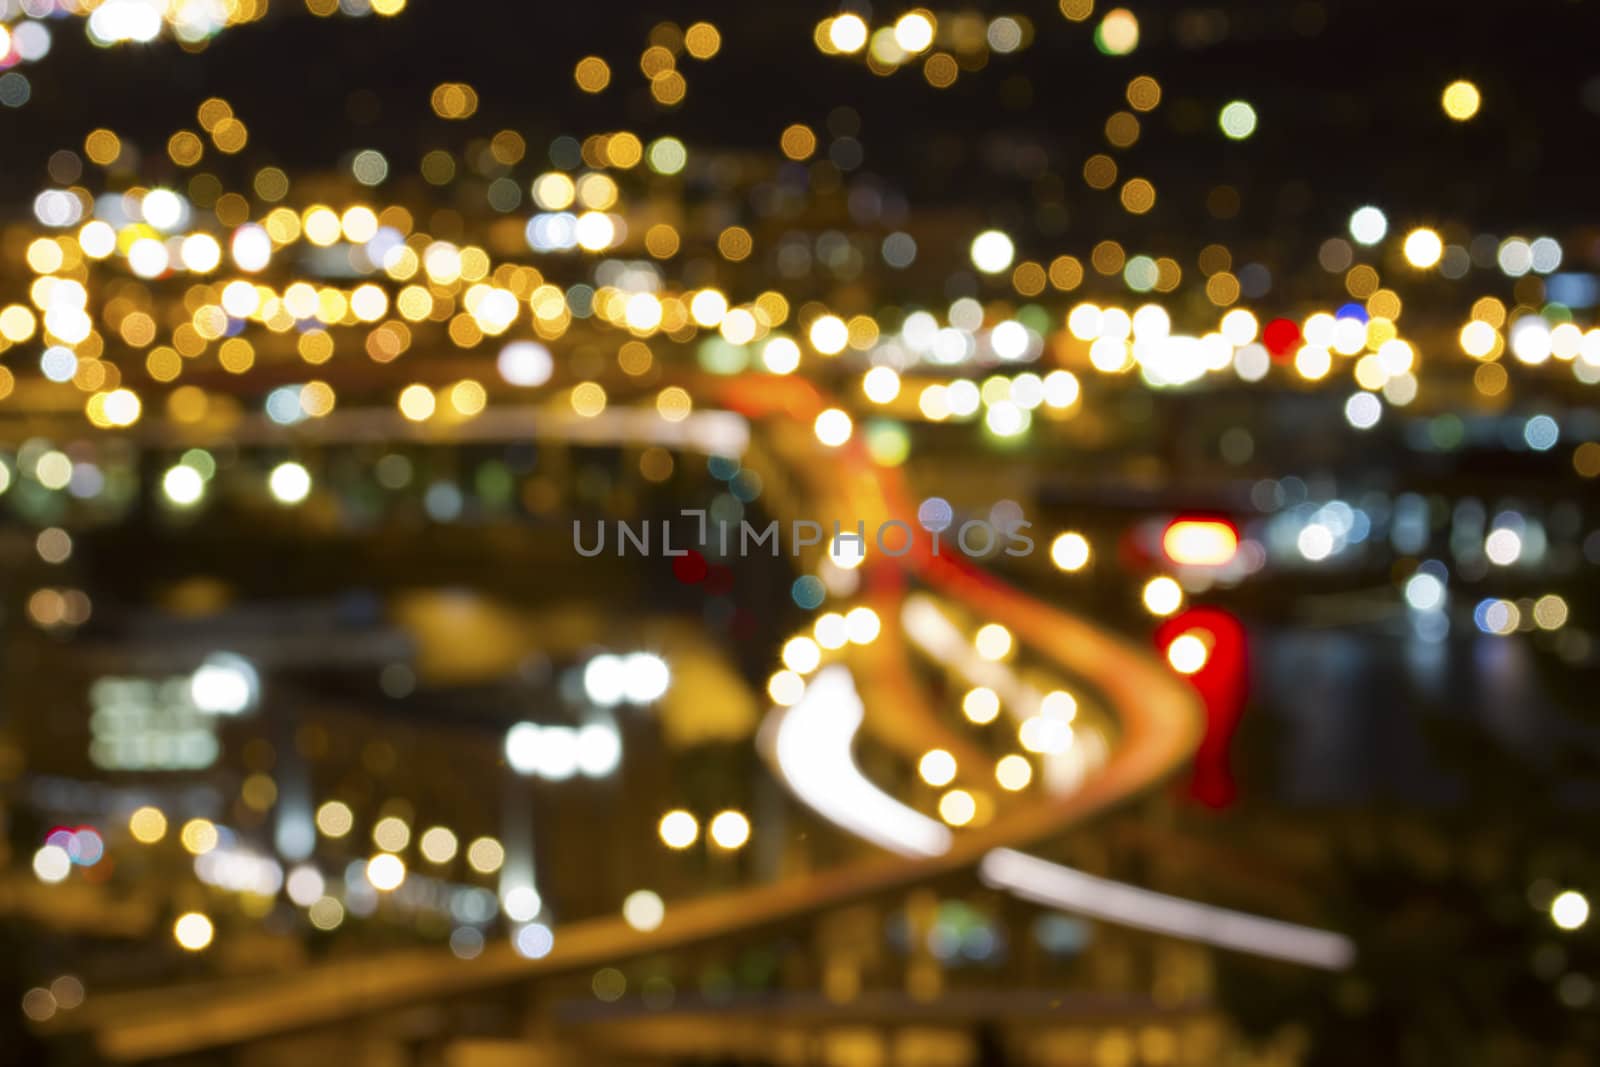 Portland Oregon Out of Focus City Night Lights and Car Trails